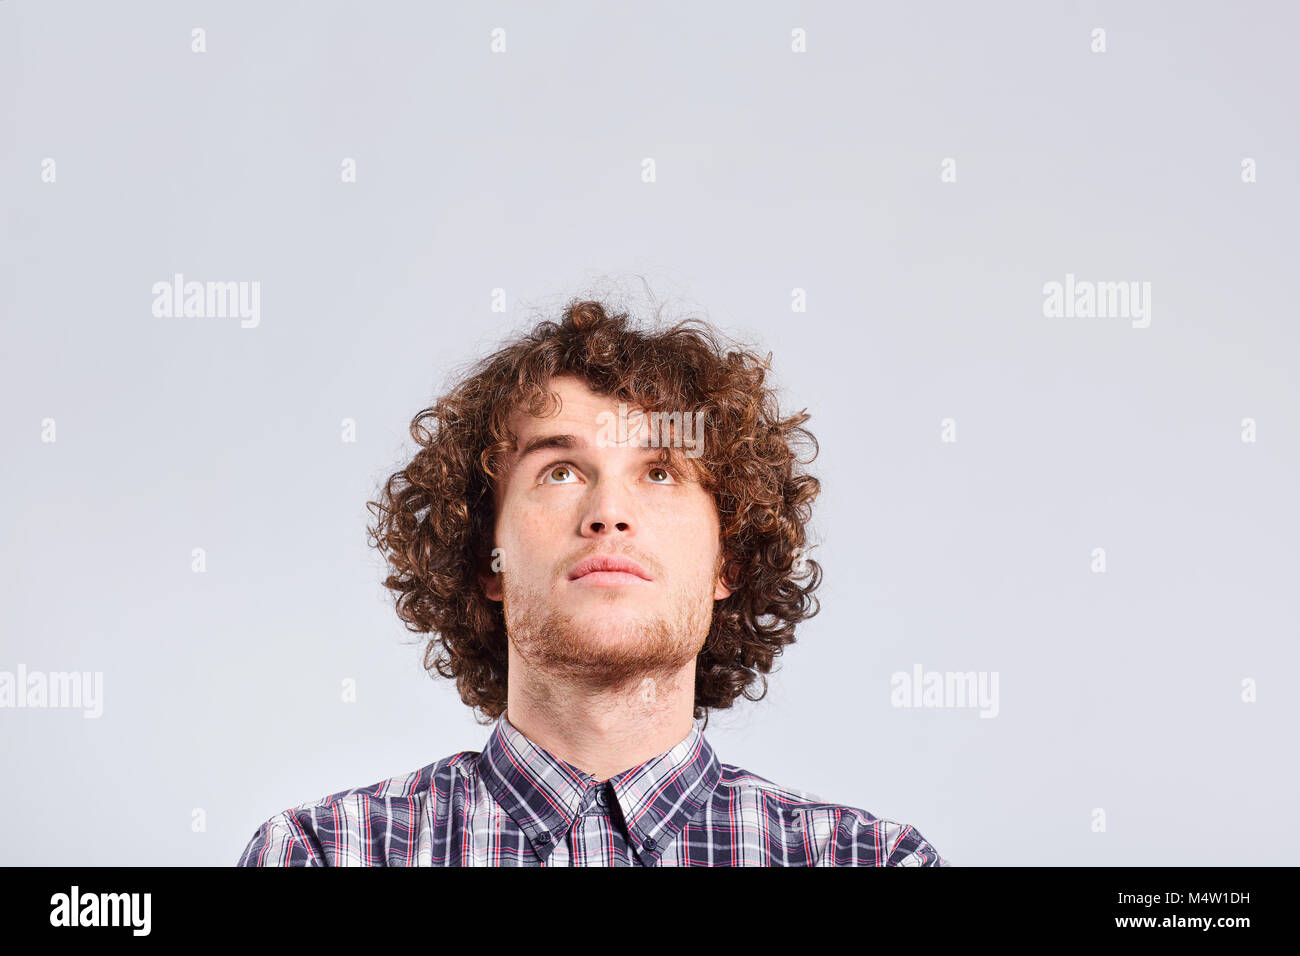 A curly-haired guy thinks with a serious emotion. Stock Photo